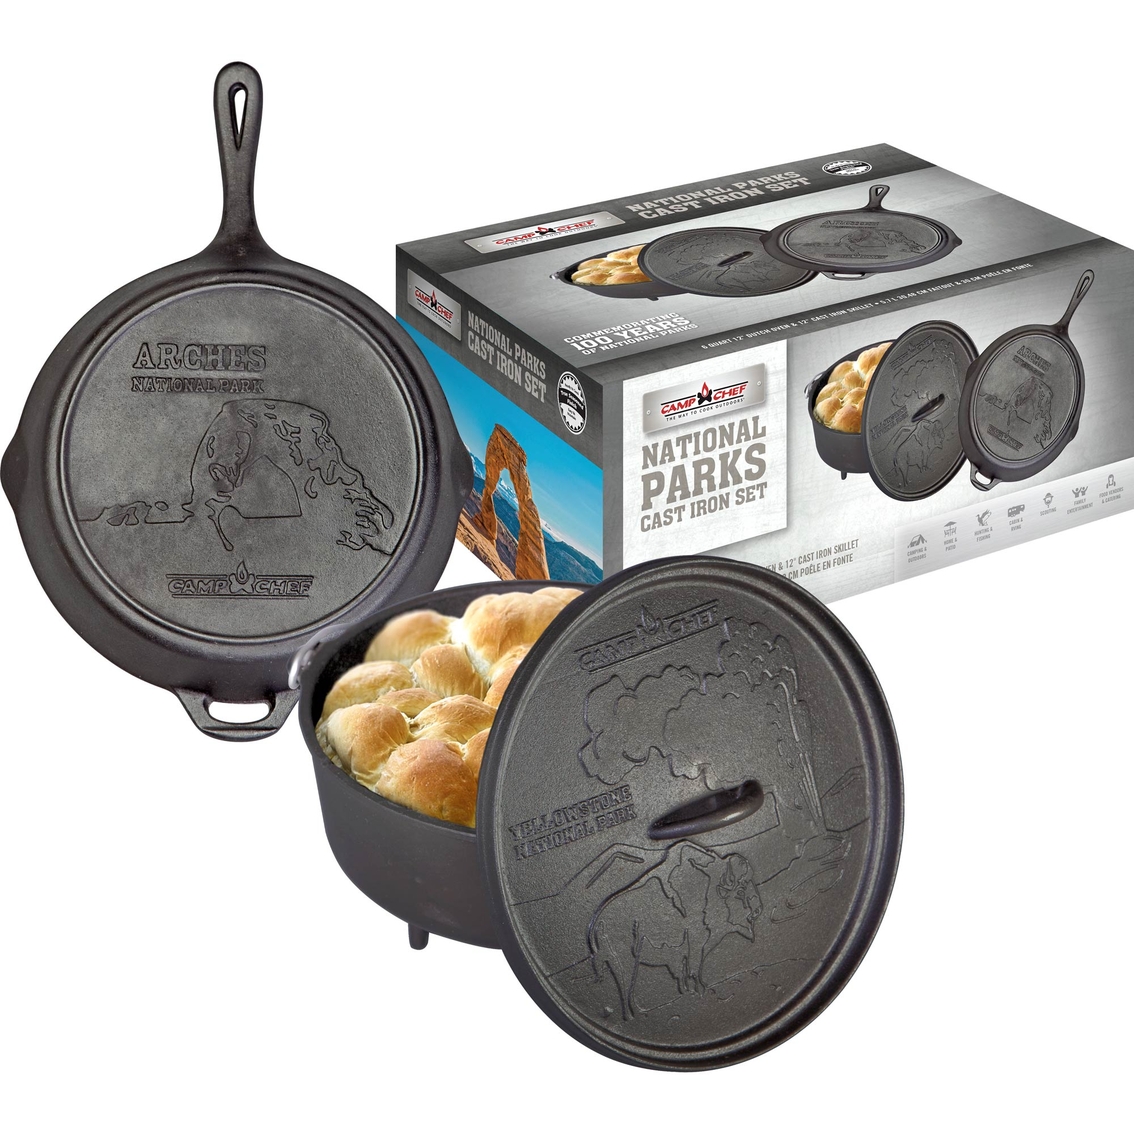 Camp Chef National Parks Cast Iron Set - Image 1 of 4